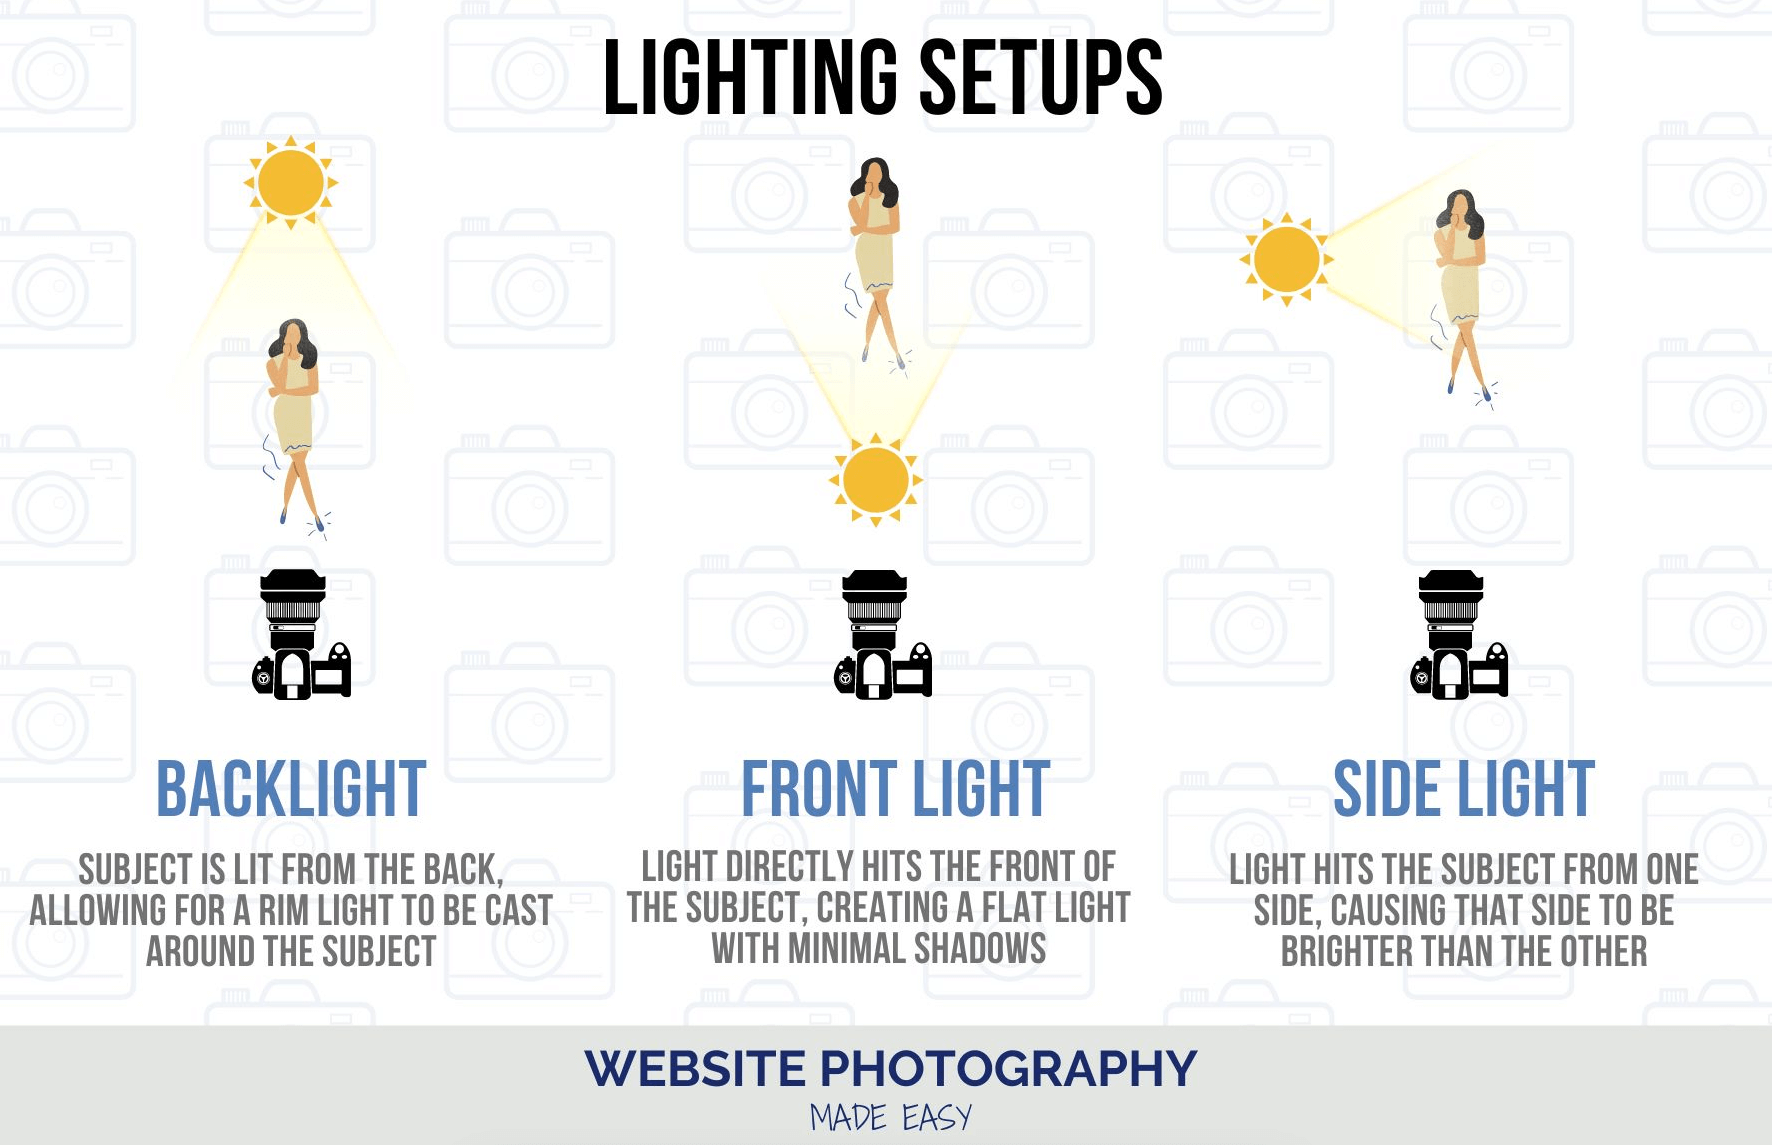 Website Photography Made Easy Lighting